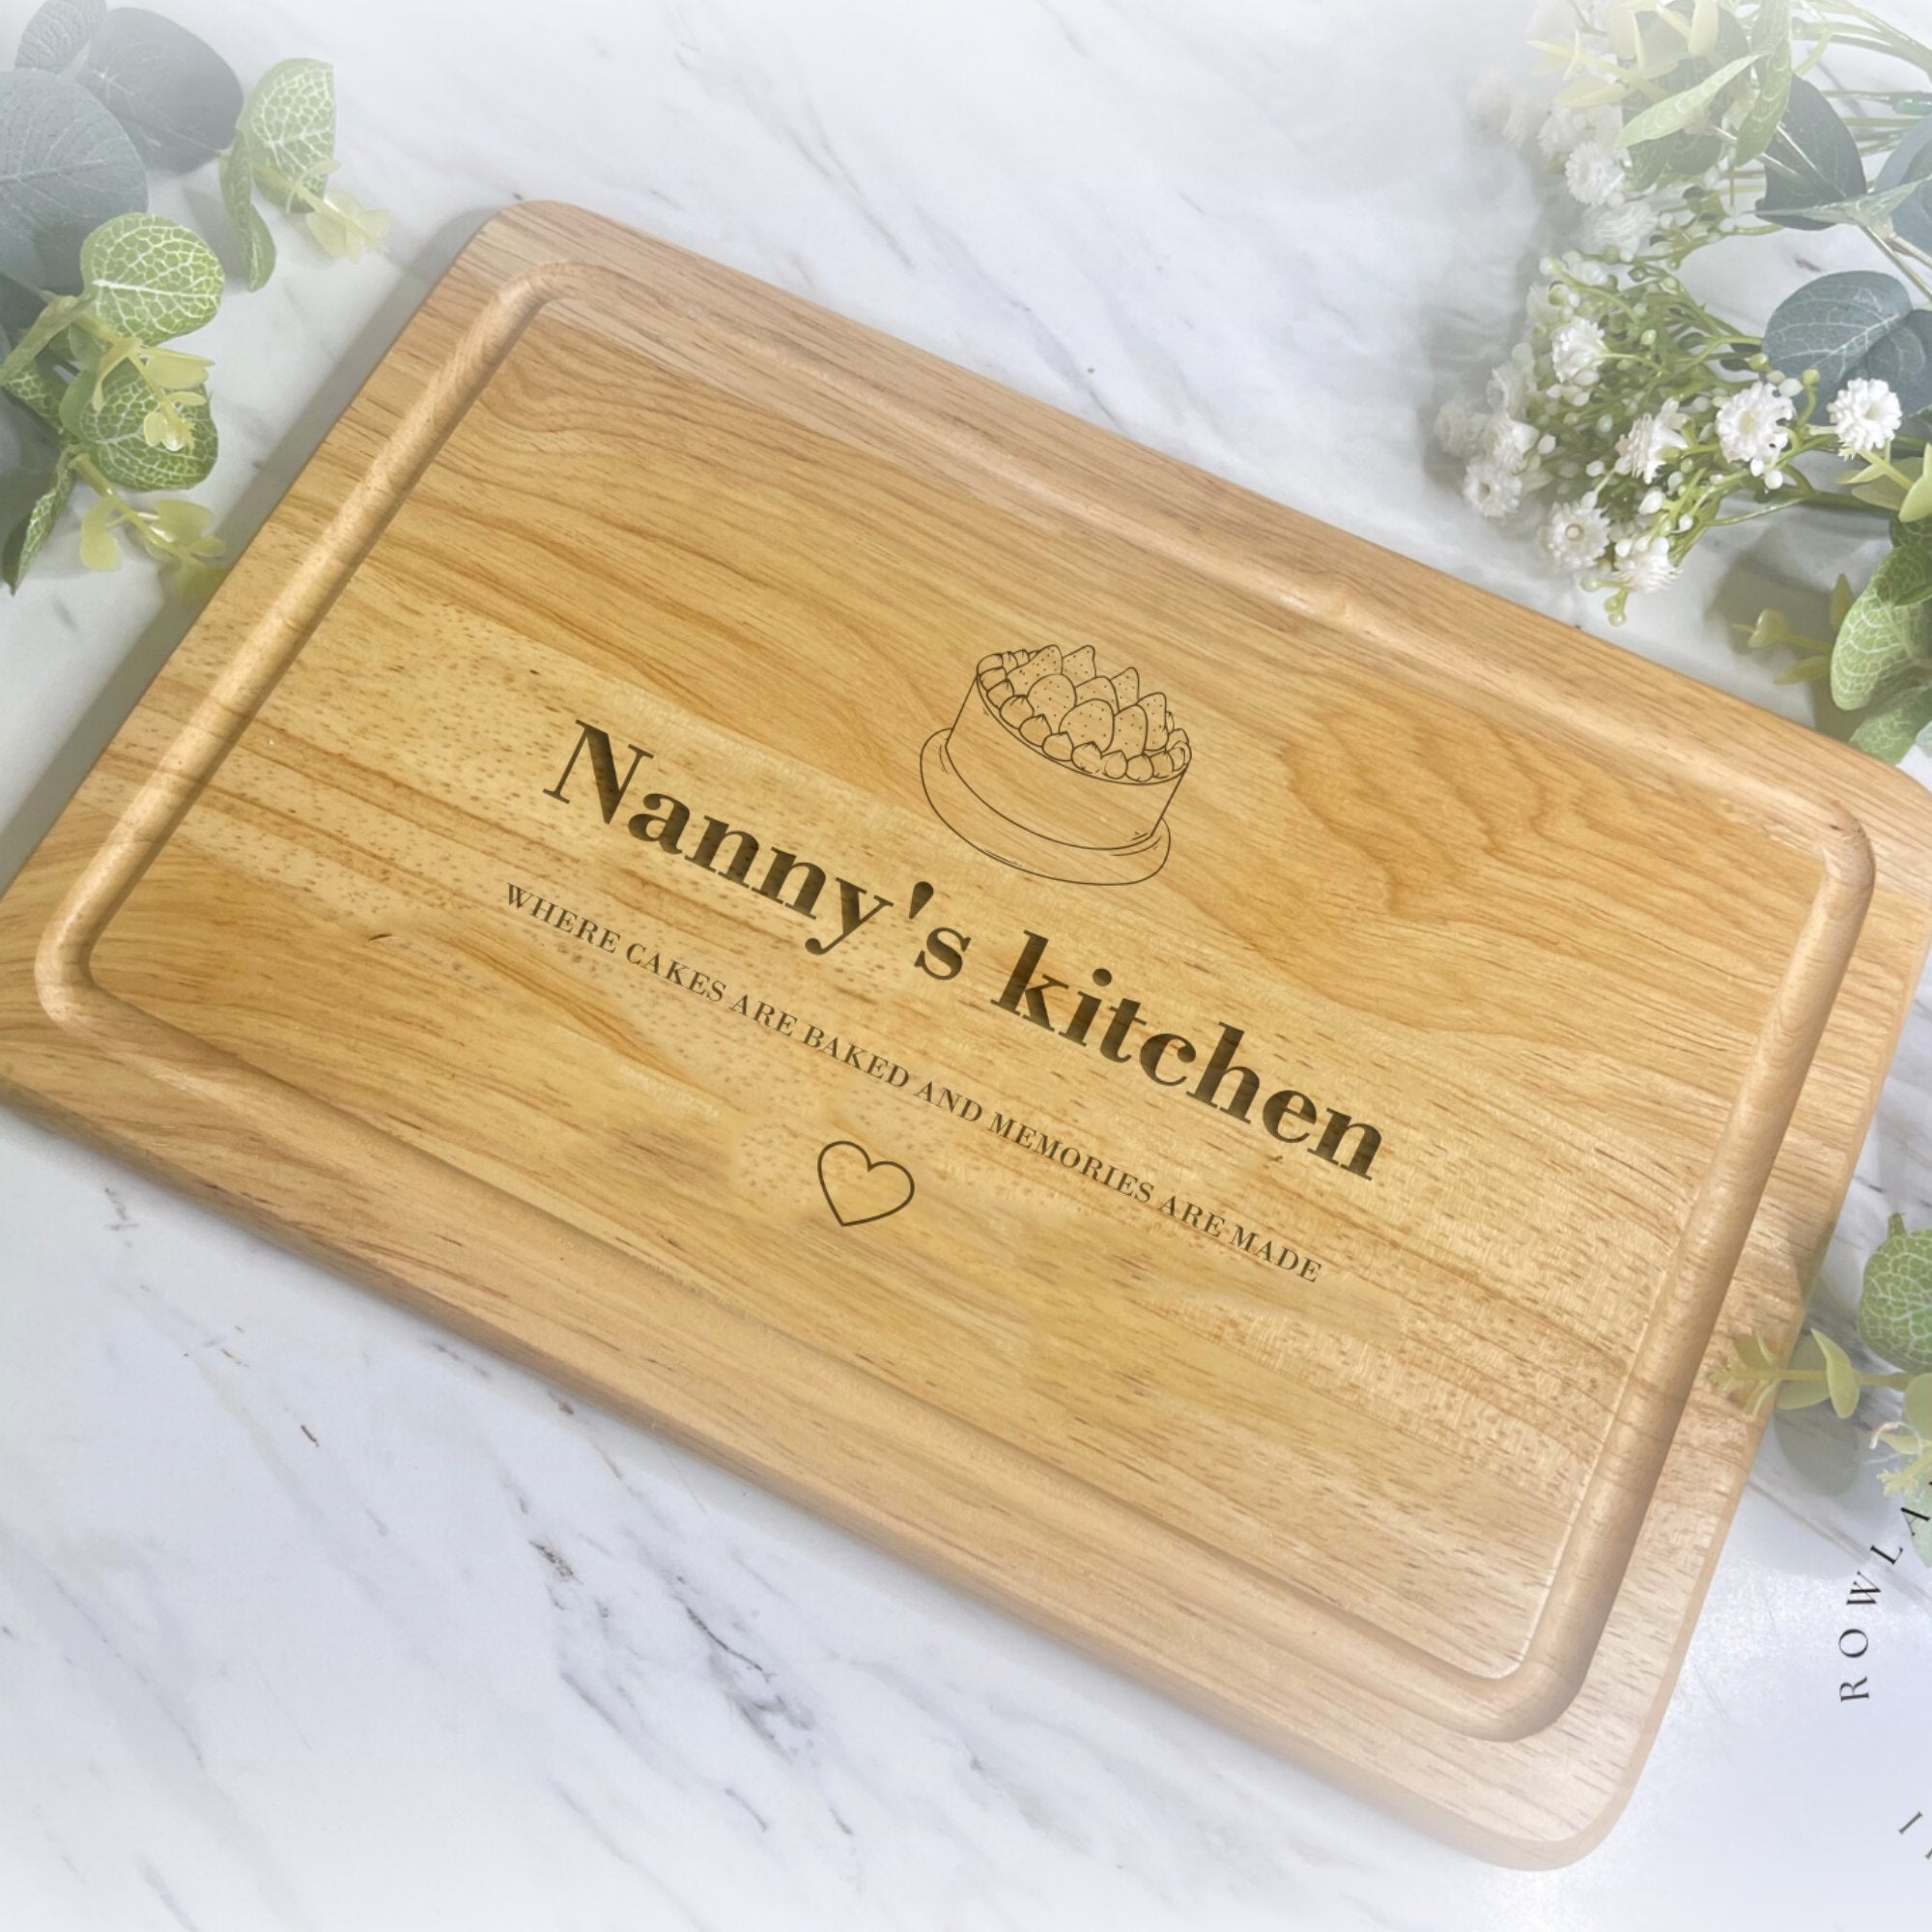 Personalised Home Gifts Collection - Charming and unique treasures for every home. Discover laser-engraved chopping boards, slate signs, and more. Shop now for thoughtful living.